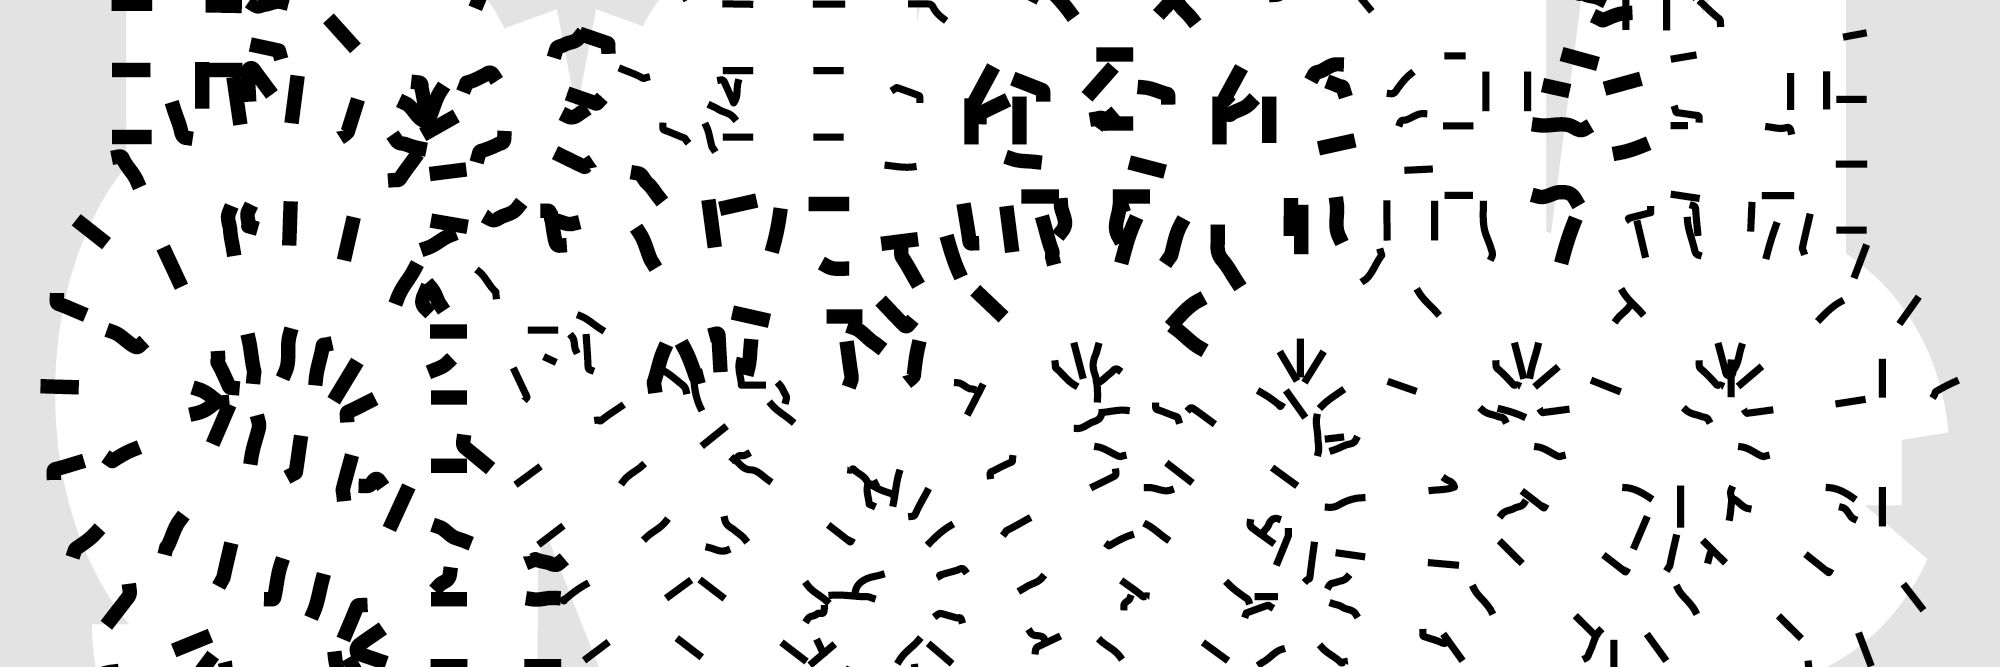 A graphic featuring a jumble of white letter-like shapes, outlined by small black dashes.   